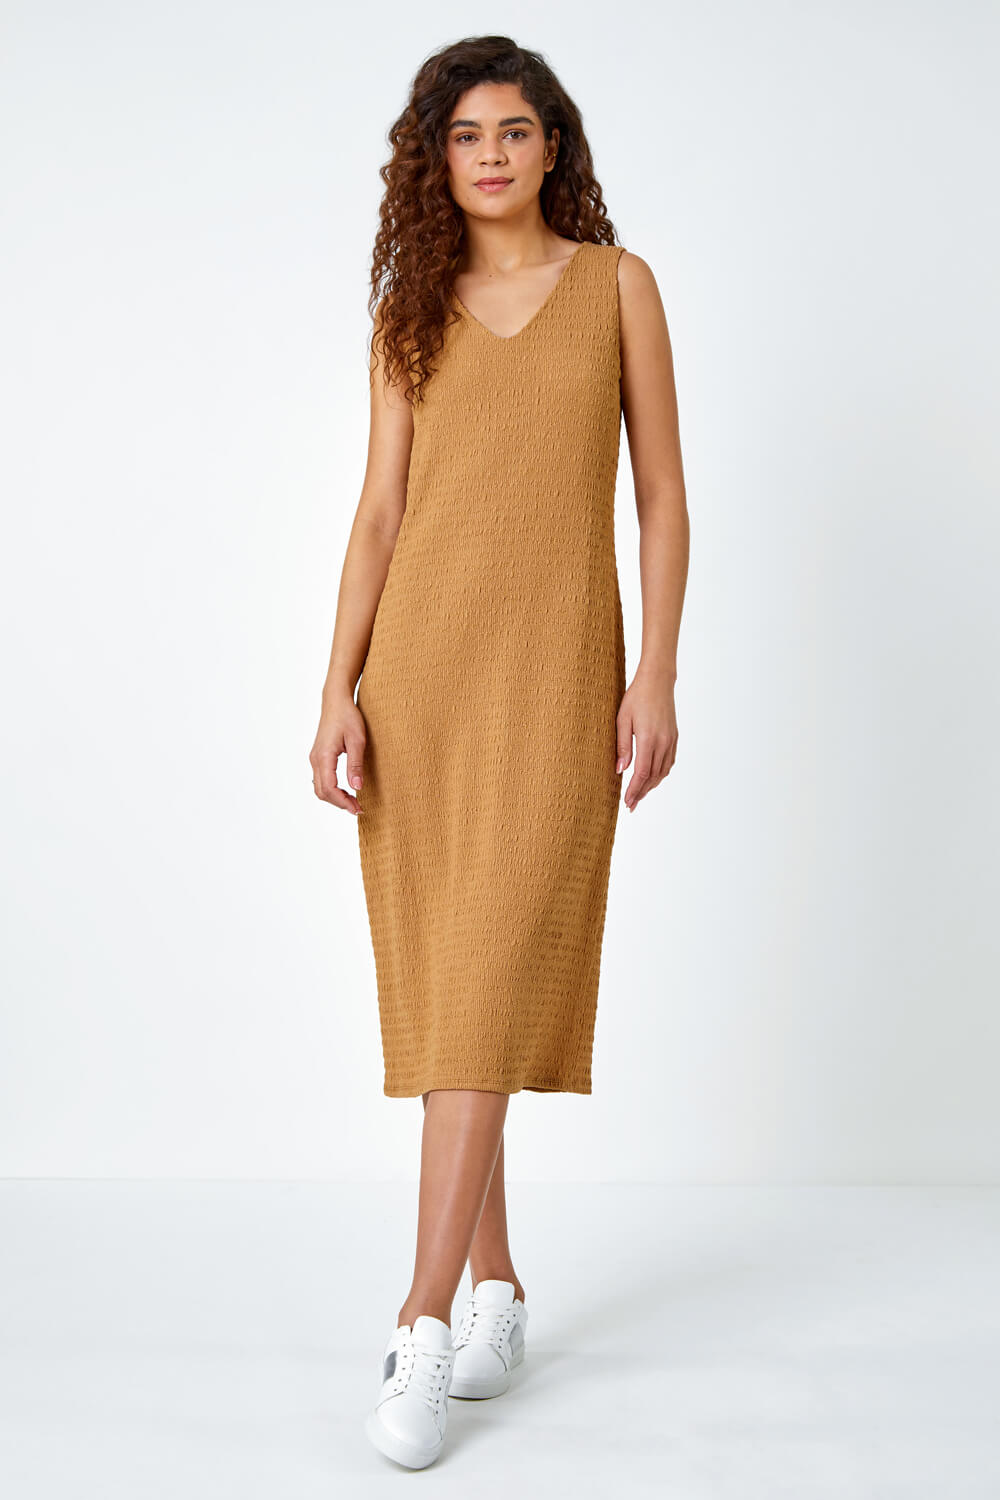 Biscuit Sleeveless Textured Midi Stretch Dress, Image 2 of 5